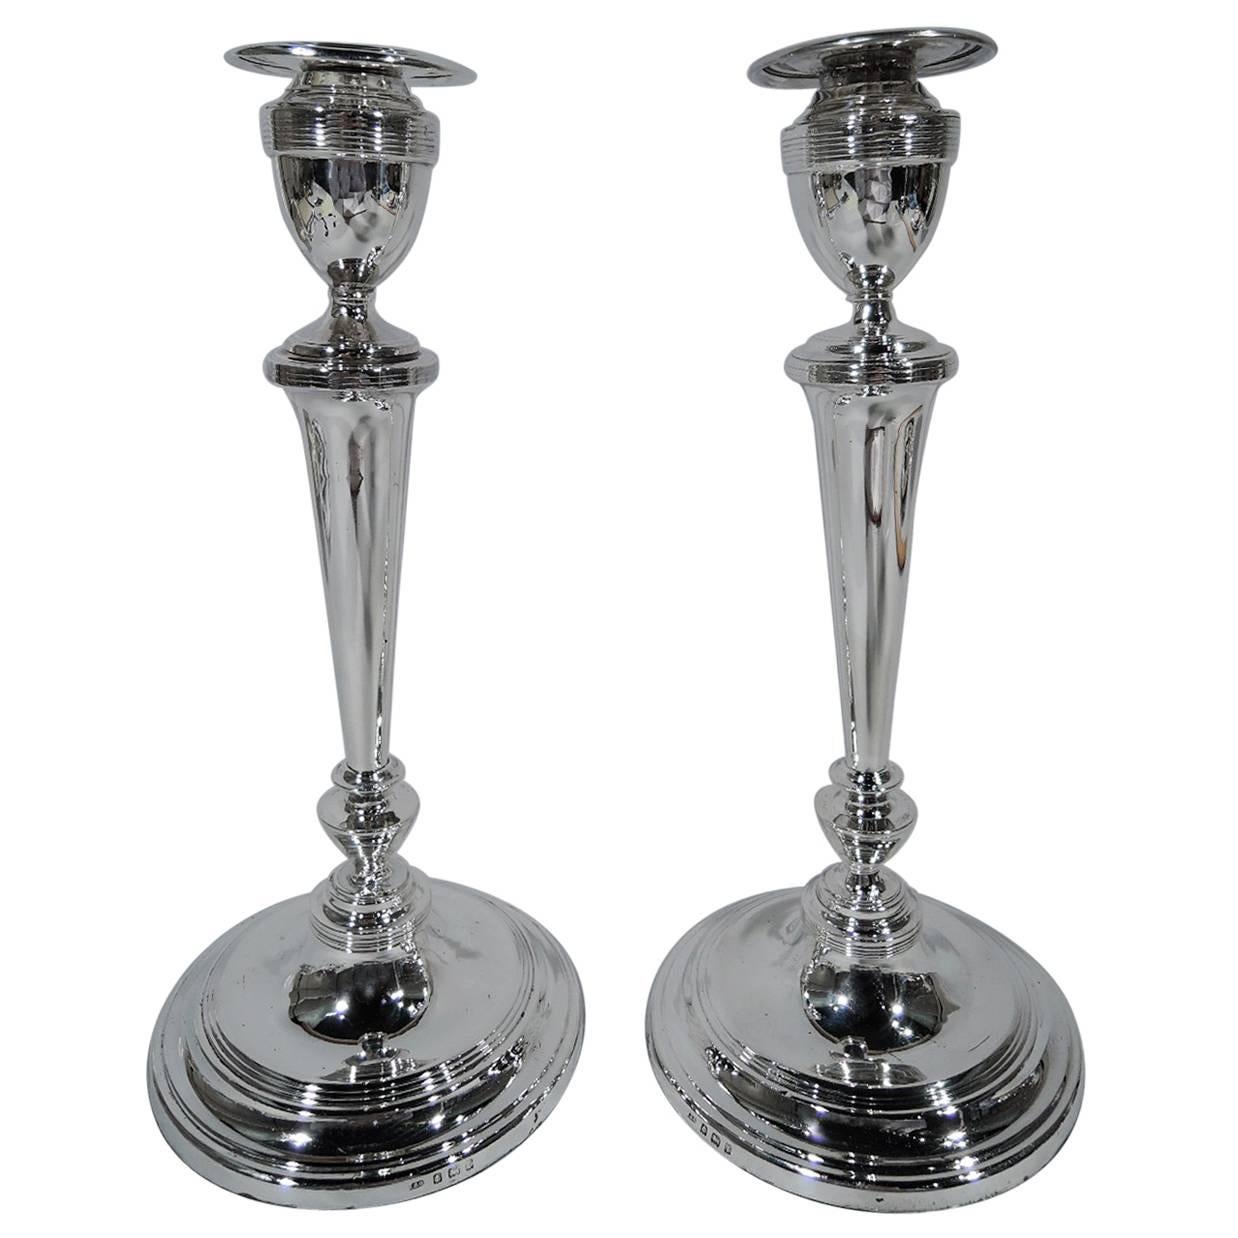 Pair of Antique English Edwardian Sterling Silver Candlesticks